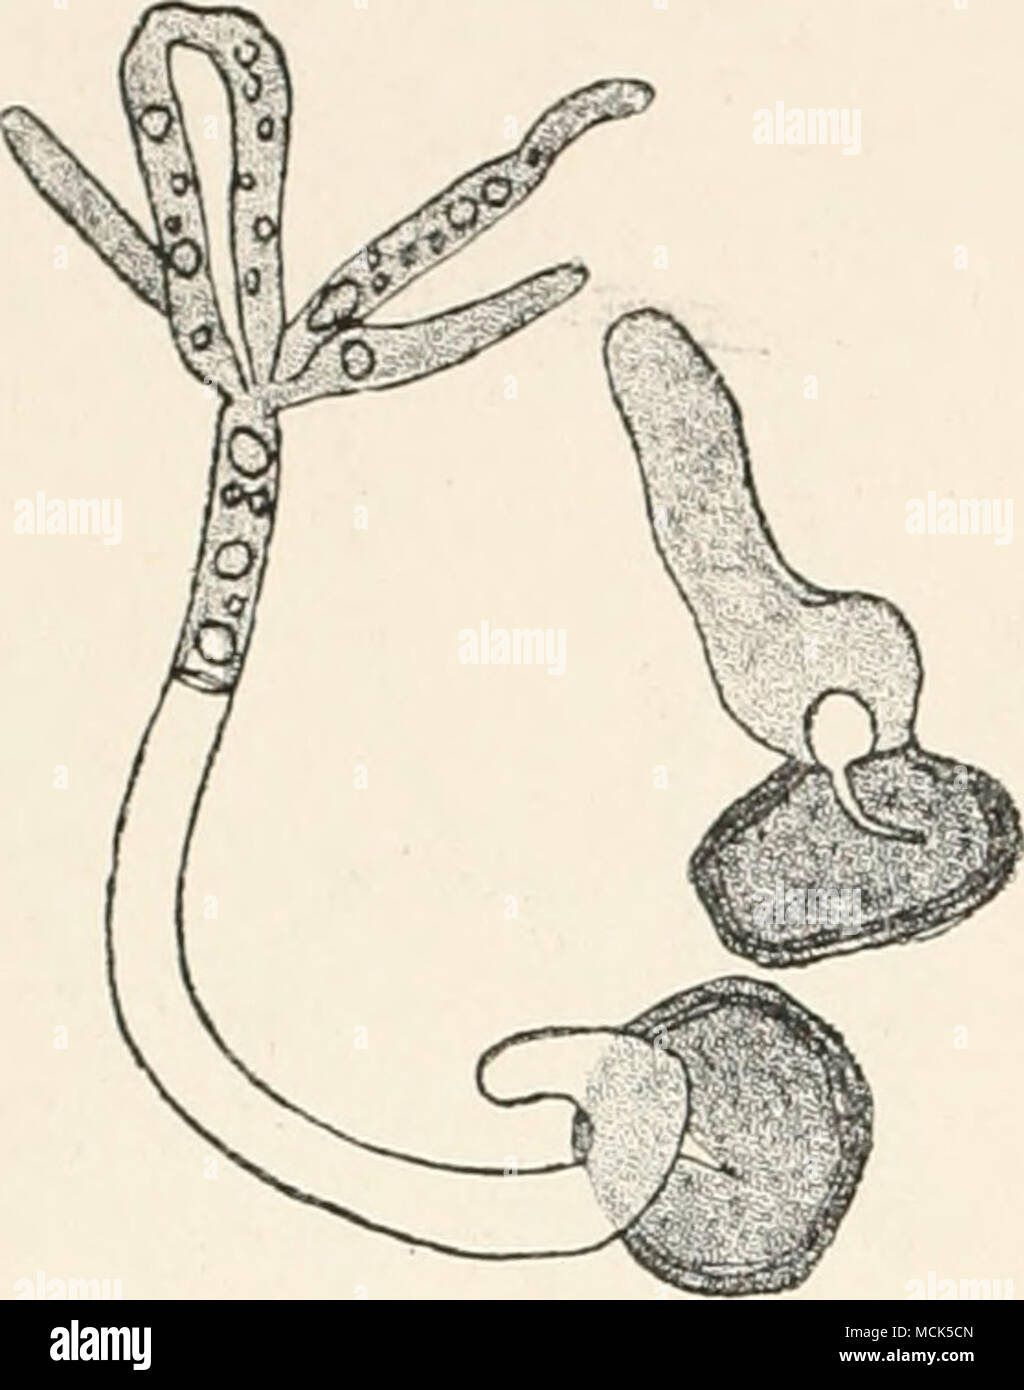 . Fig. 171.—Melanotaenium endogenum. Germinating spores. One has already produced a promycellvim with a whorl of five branches, of which two have fused. (After VV'oronln.) Urocystis, Spores massed into balls, consisting of several spores sur- rounded by smaller companion-cells incapable of germination. The central spores are clearly distinguished from the others by their larger size, darker colour, and thicker coat. The balls of spores are developed inside coils of hyphae, which become entwined together and swell up in a gelatinous manner. The central spores on germination give rise to a promy Stock Photo